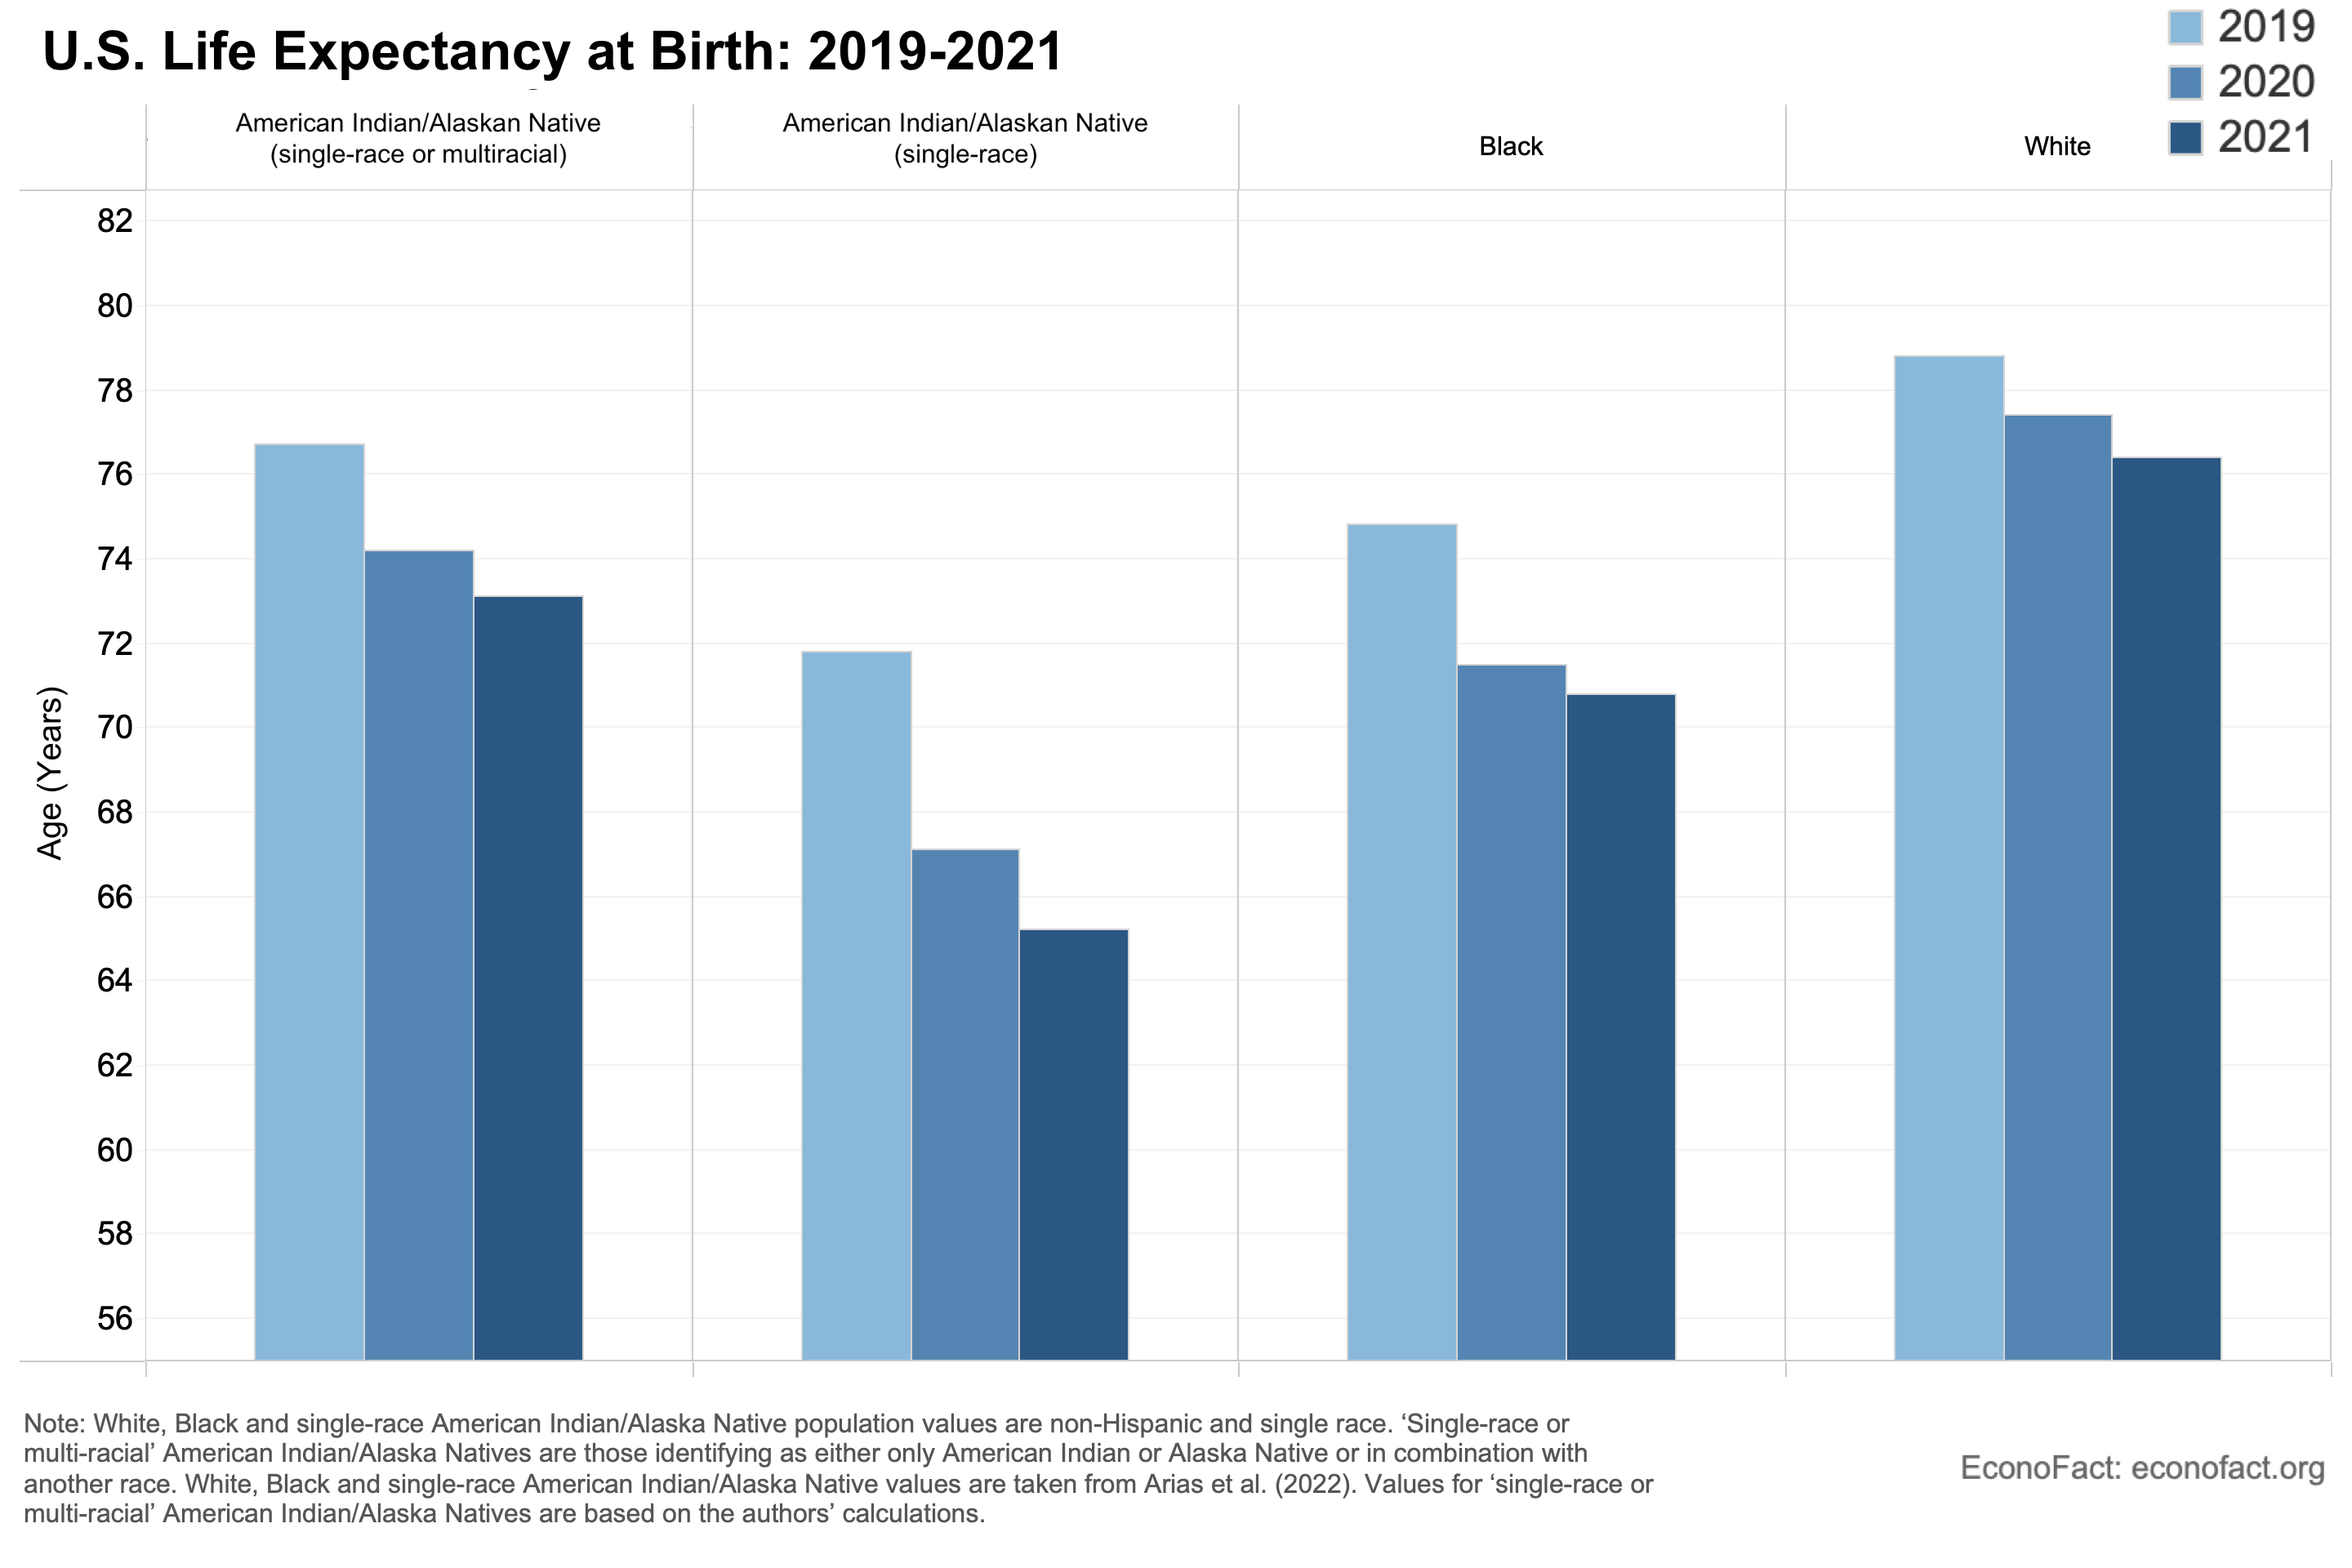 U.S. life expectancy at birth, selected groups - 2019-2021.